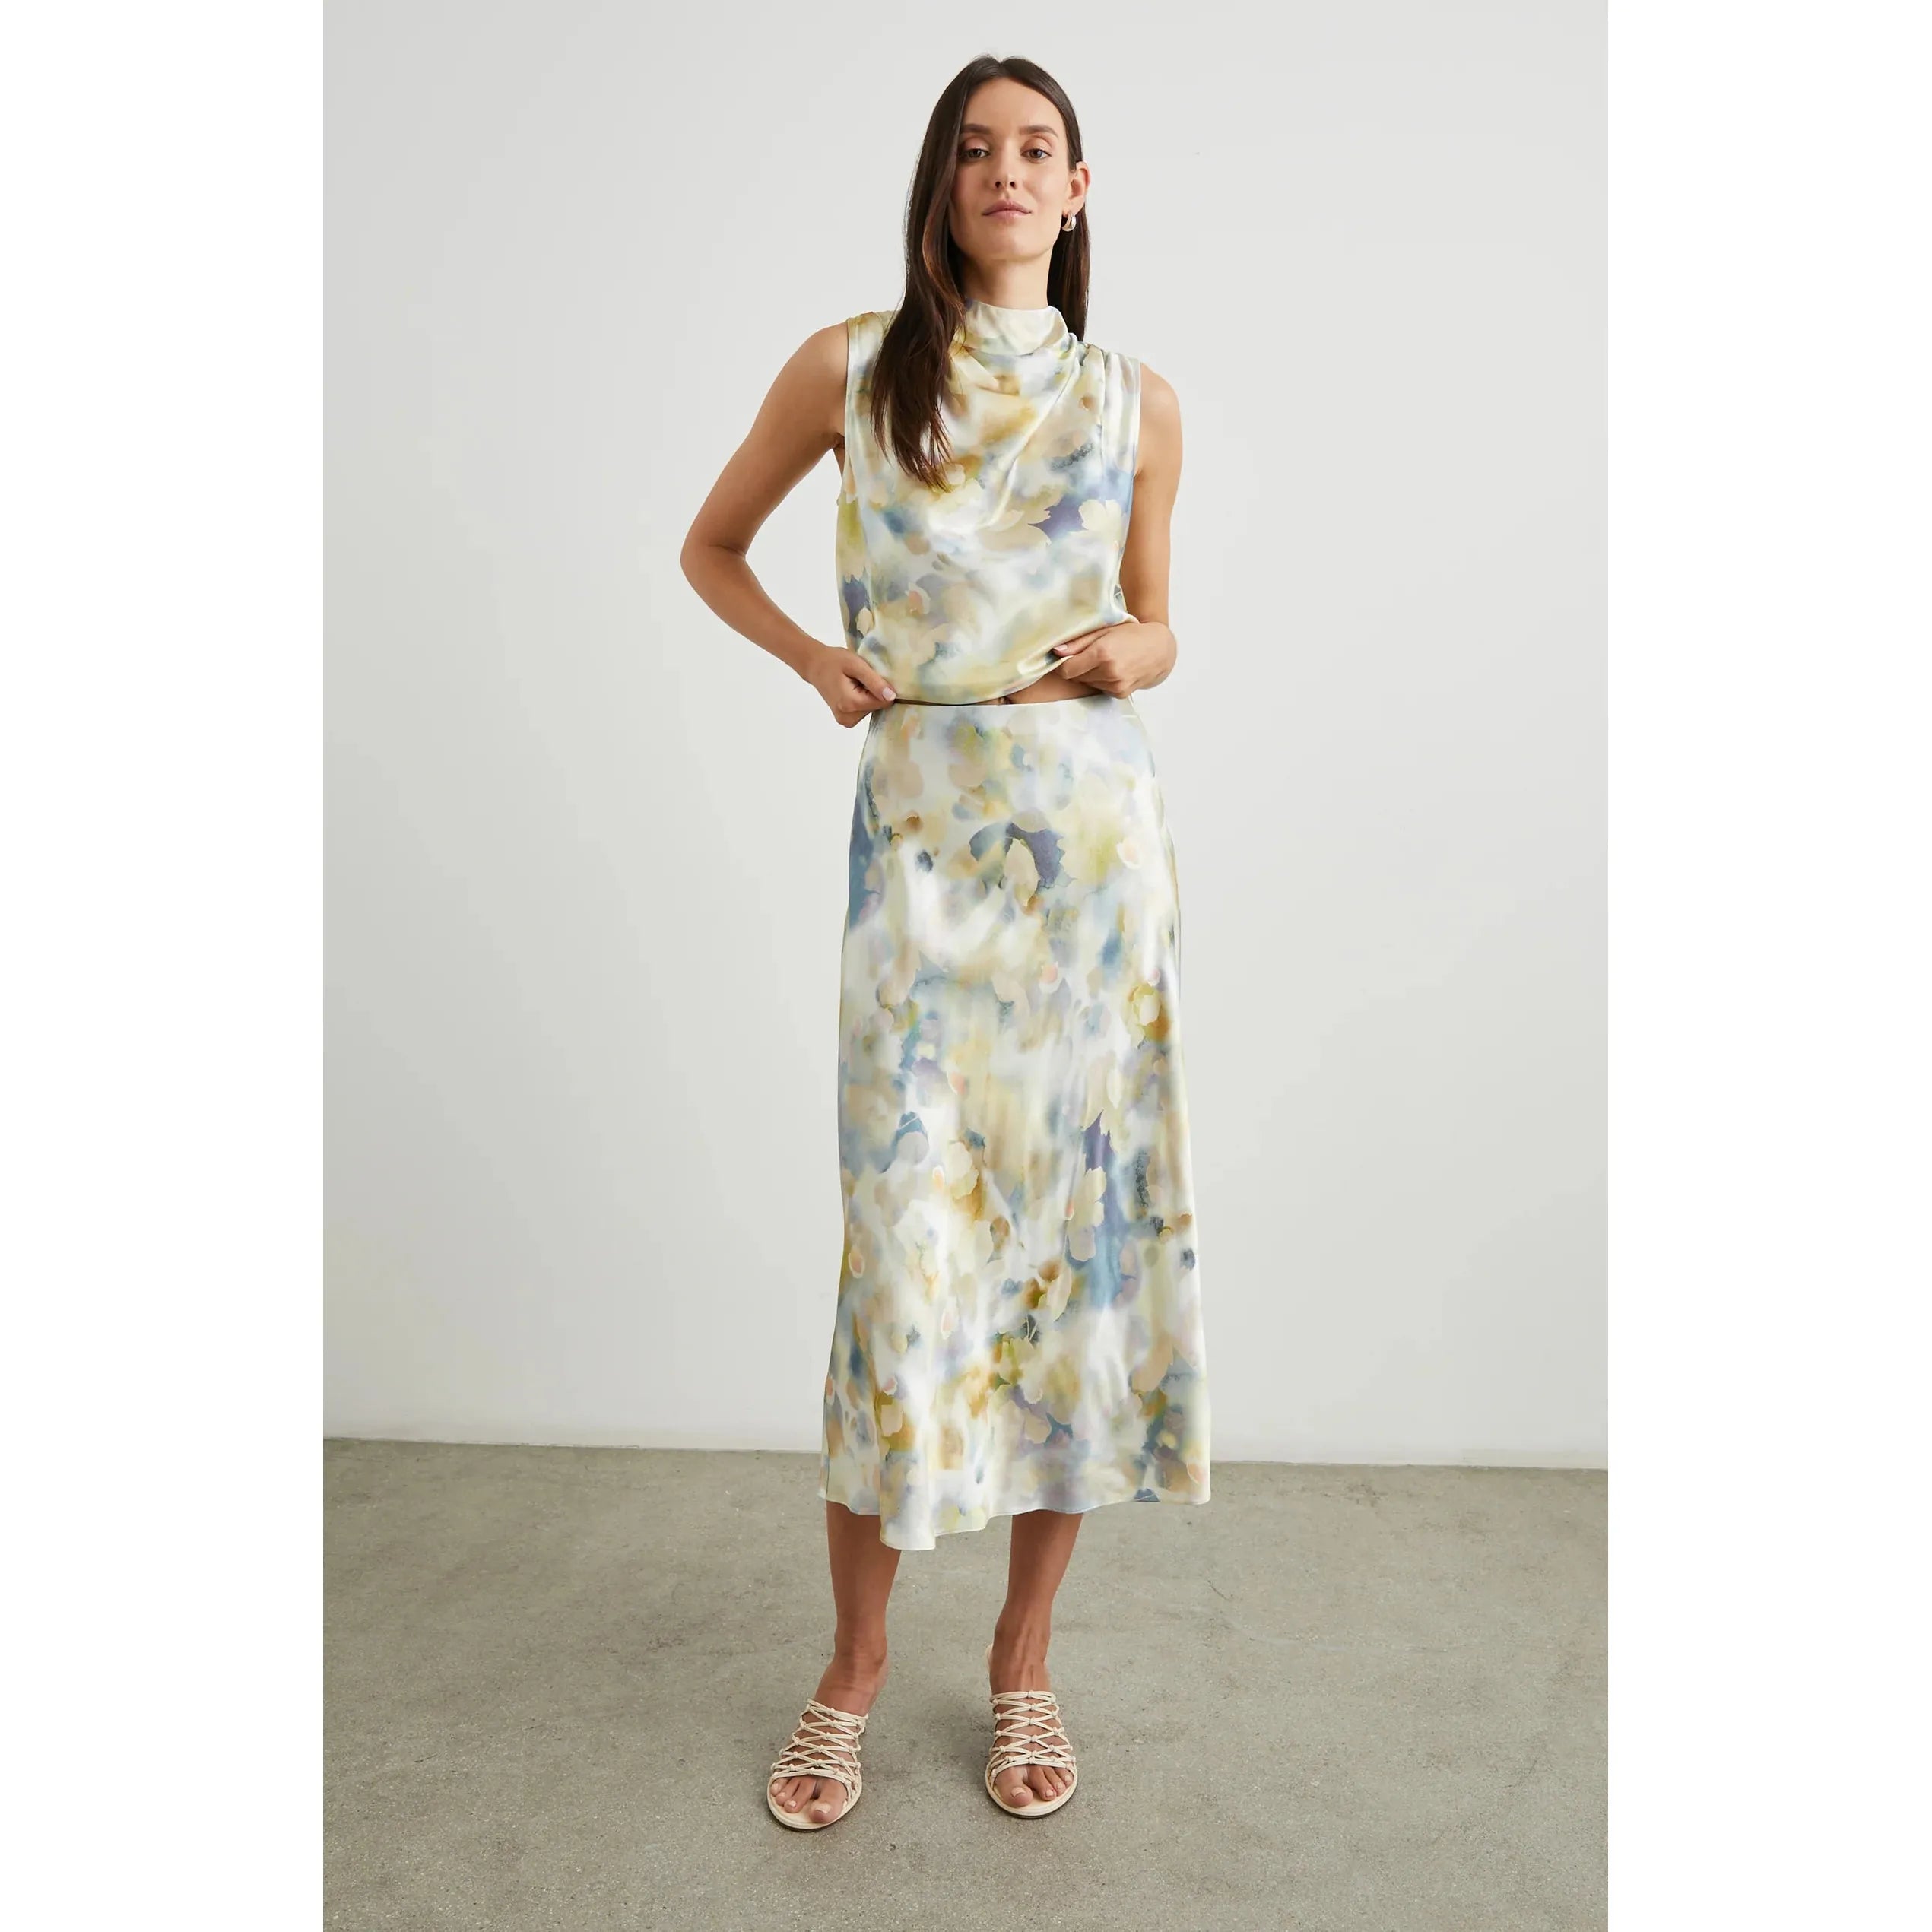 Rails - Anya Skirt in Diffused Blossom